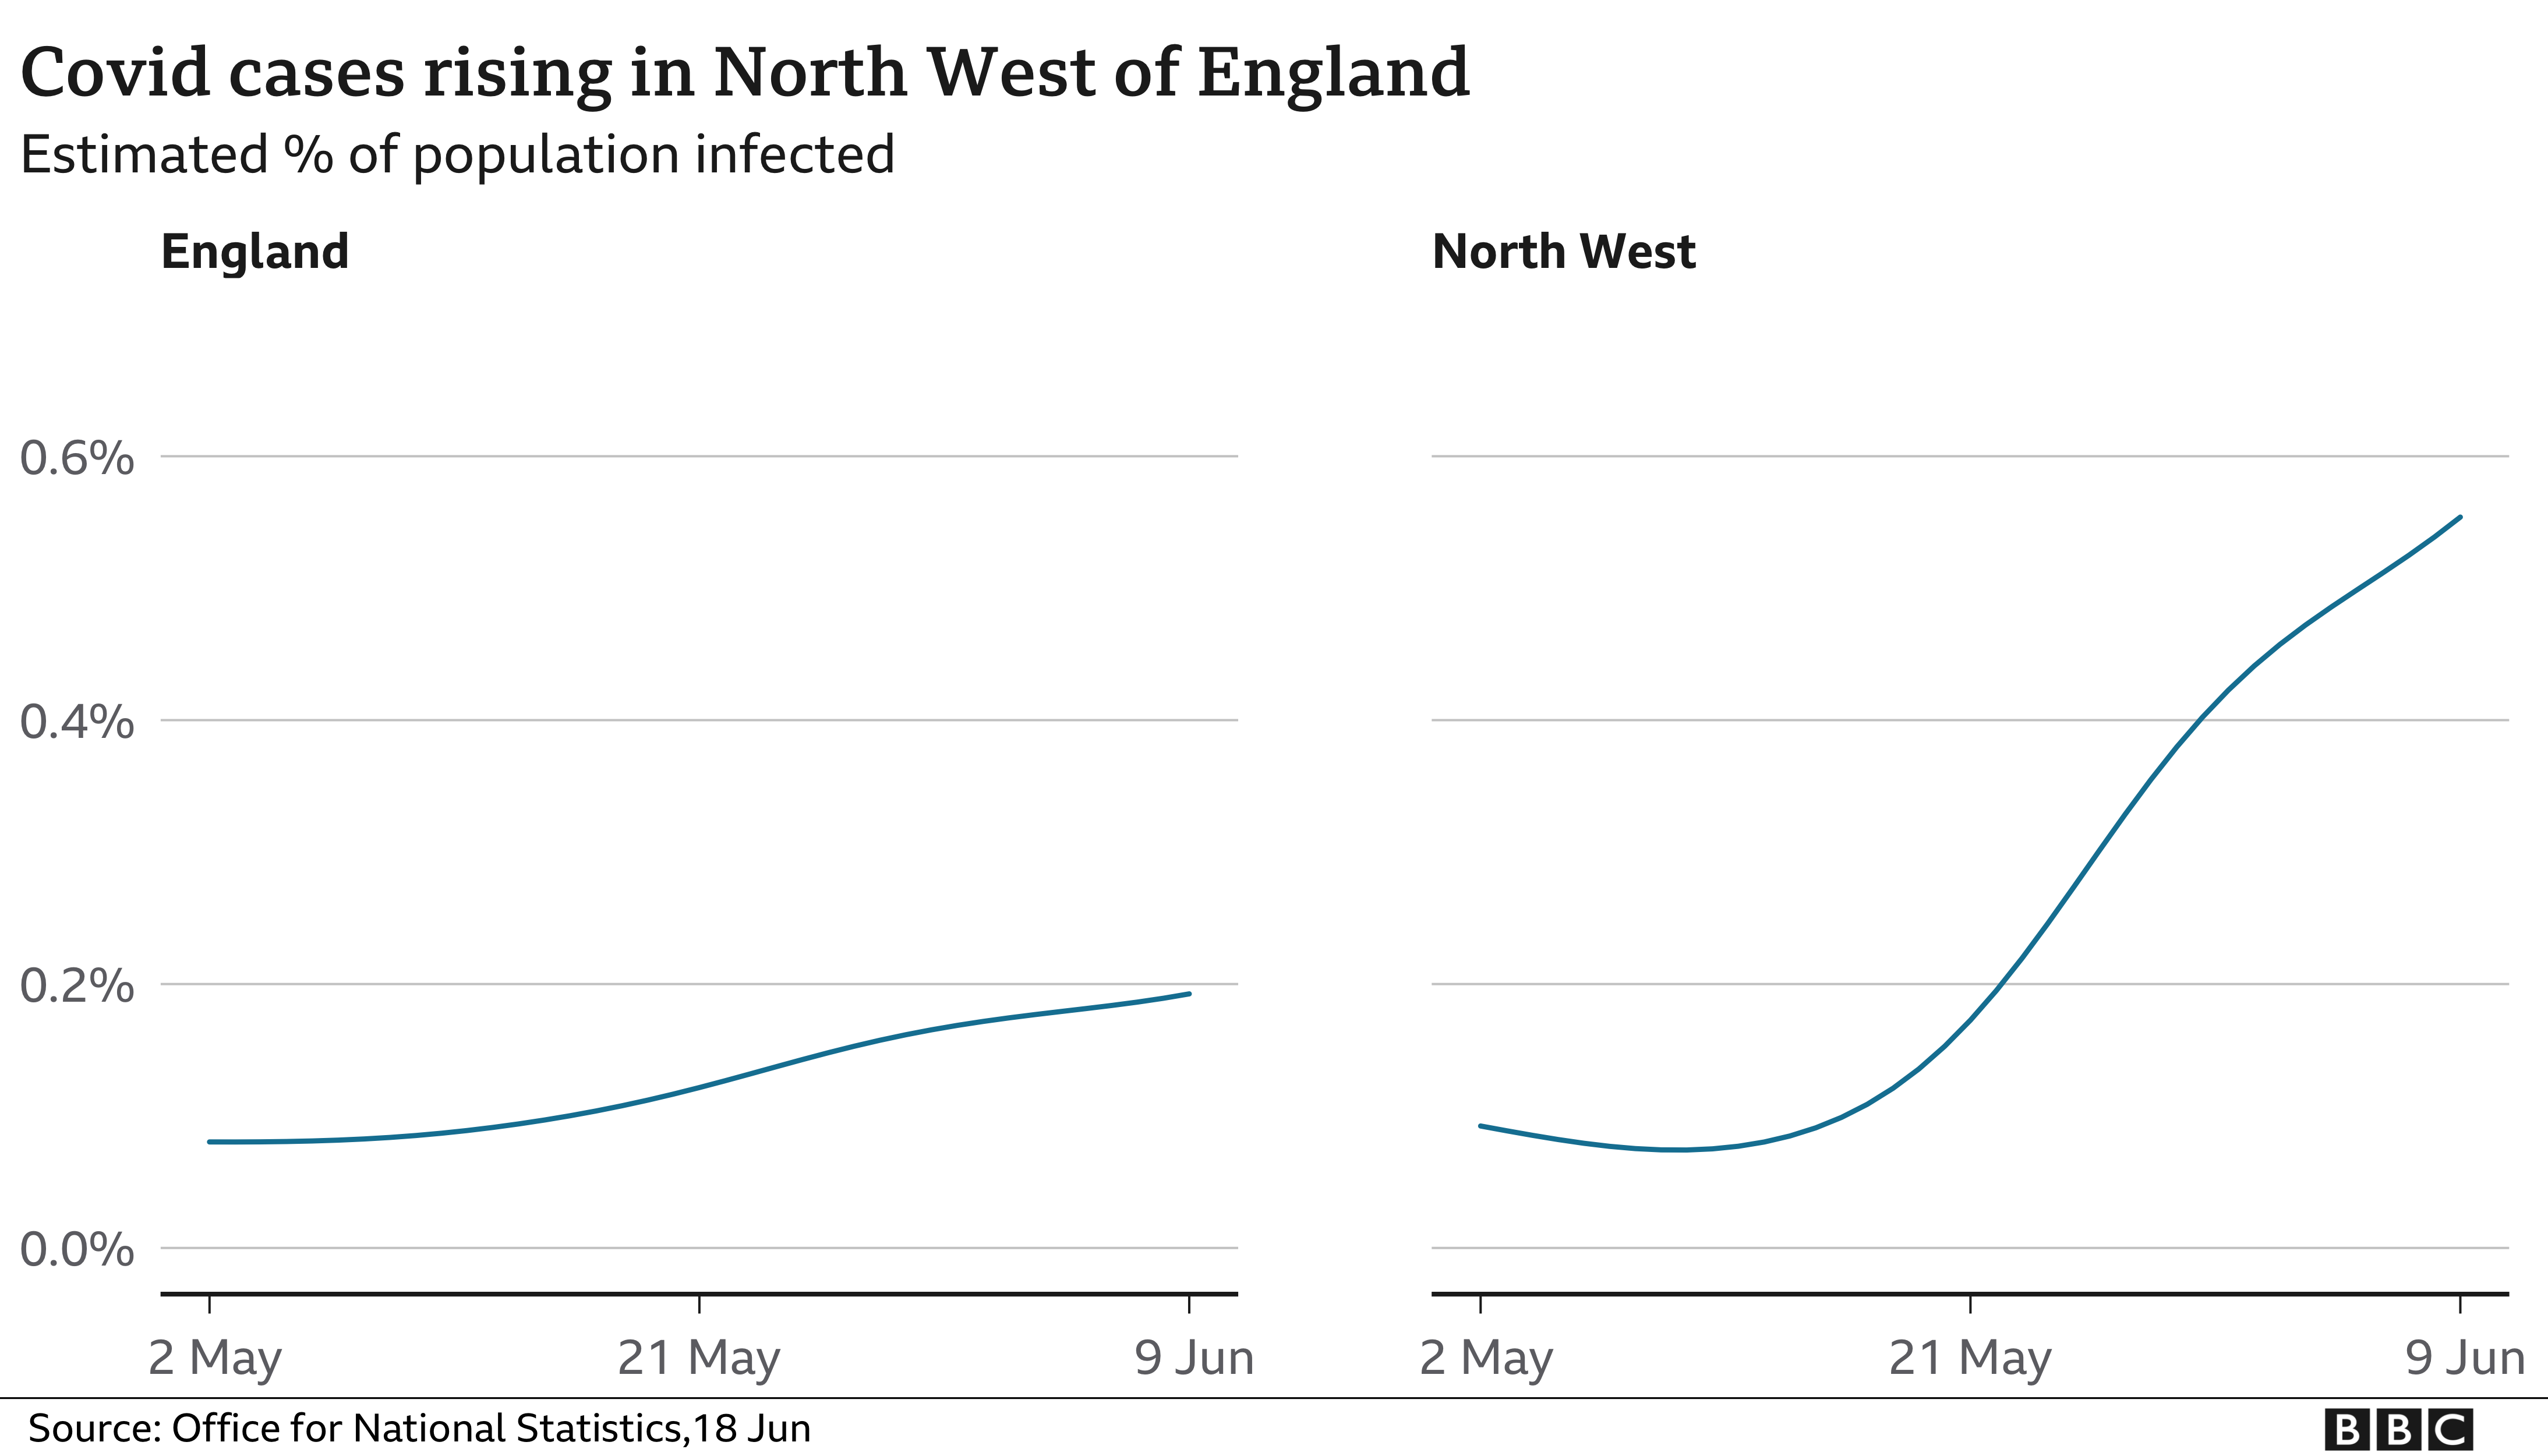 Covid cases rising in the North West of England